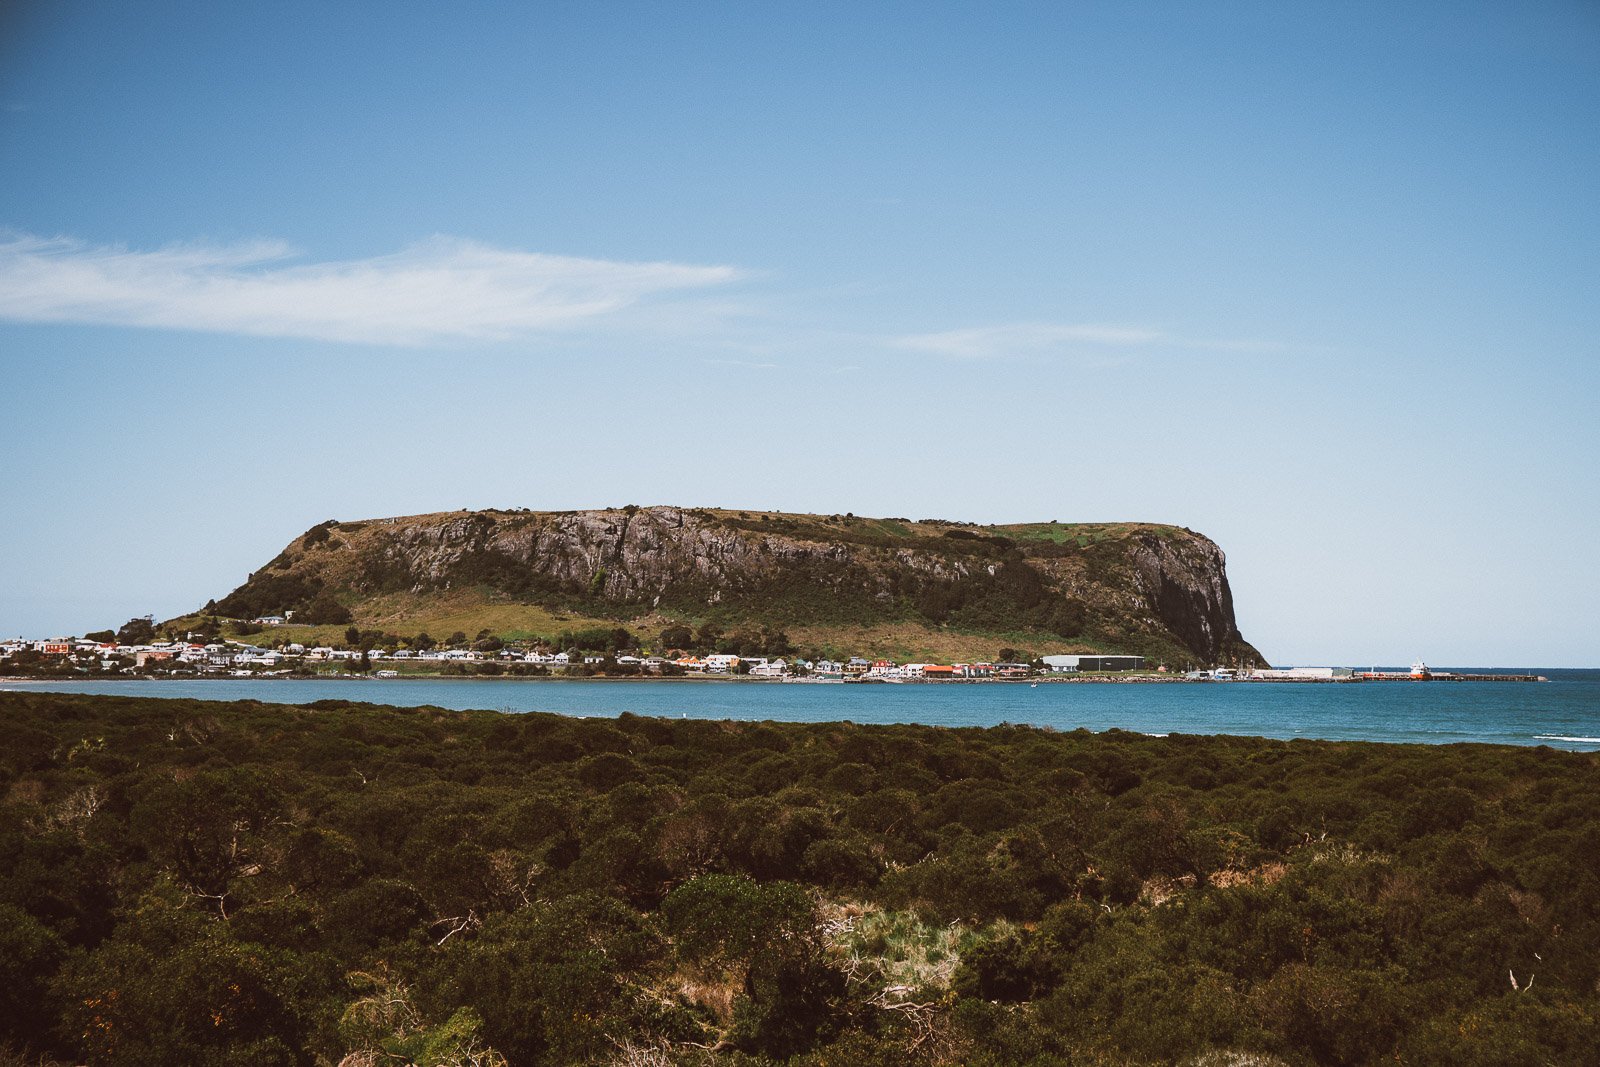 Clear view of The Nut from above Tallows Beach | Things to do in Stanley Tasmania